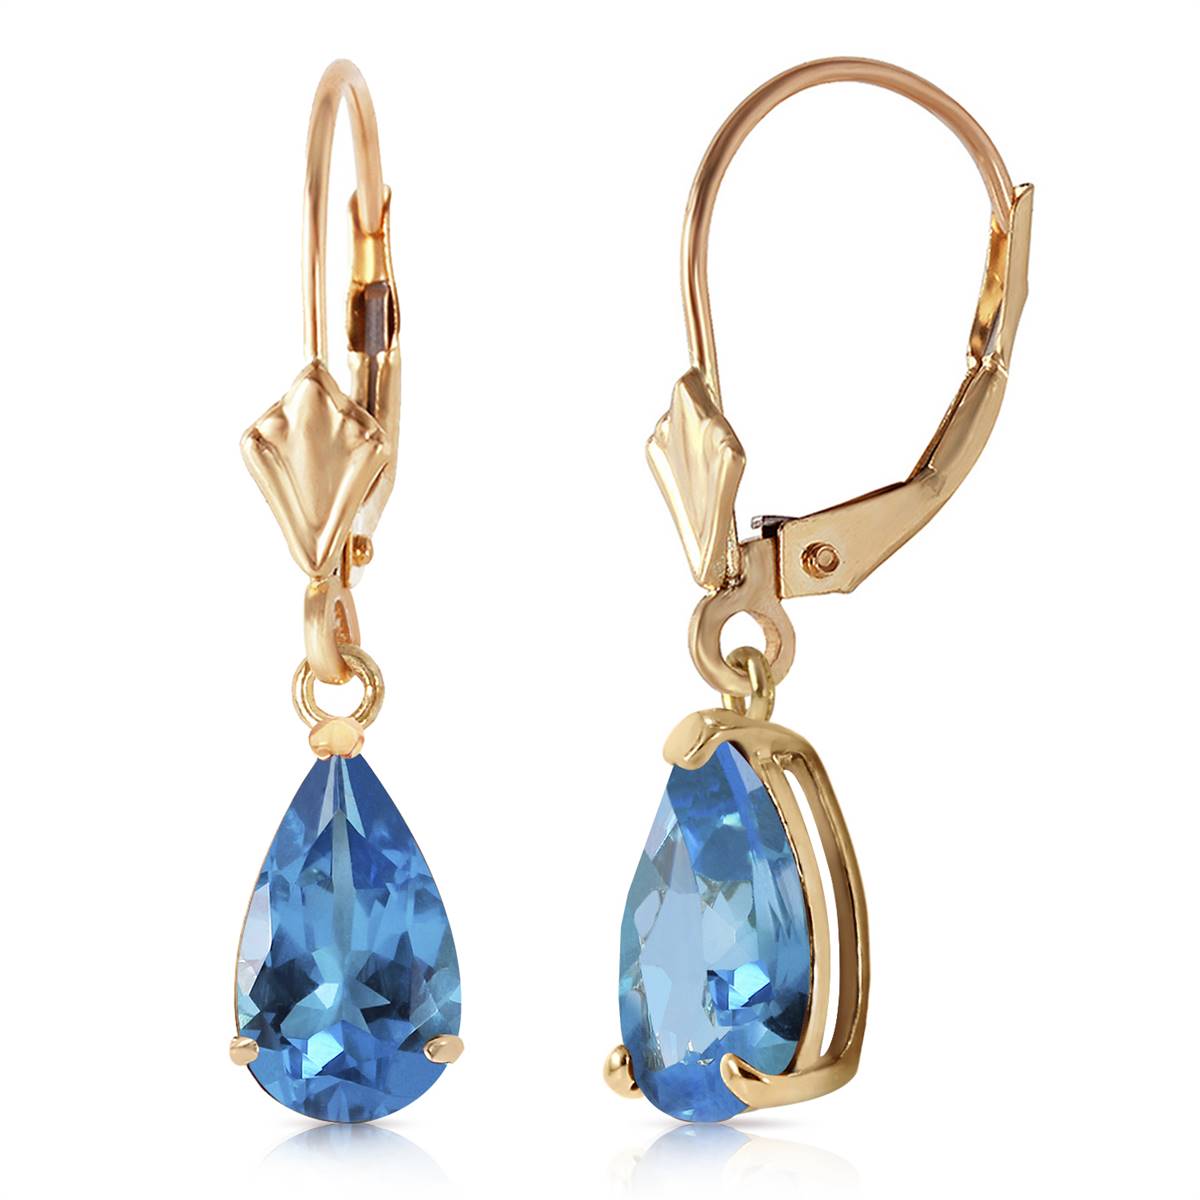 3.77 Carat 14K Solid Yellow Gold Extravaganza Blue Topaz Earrings